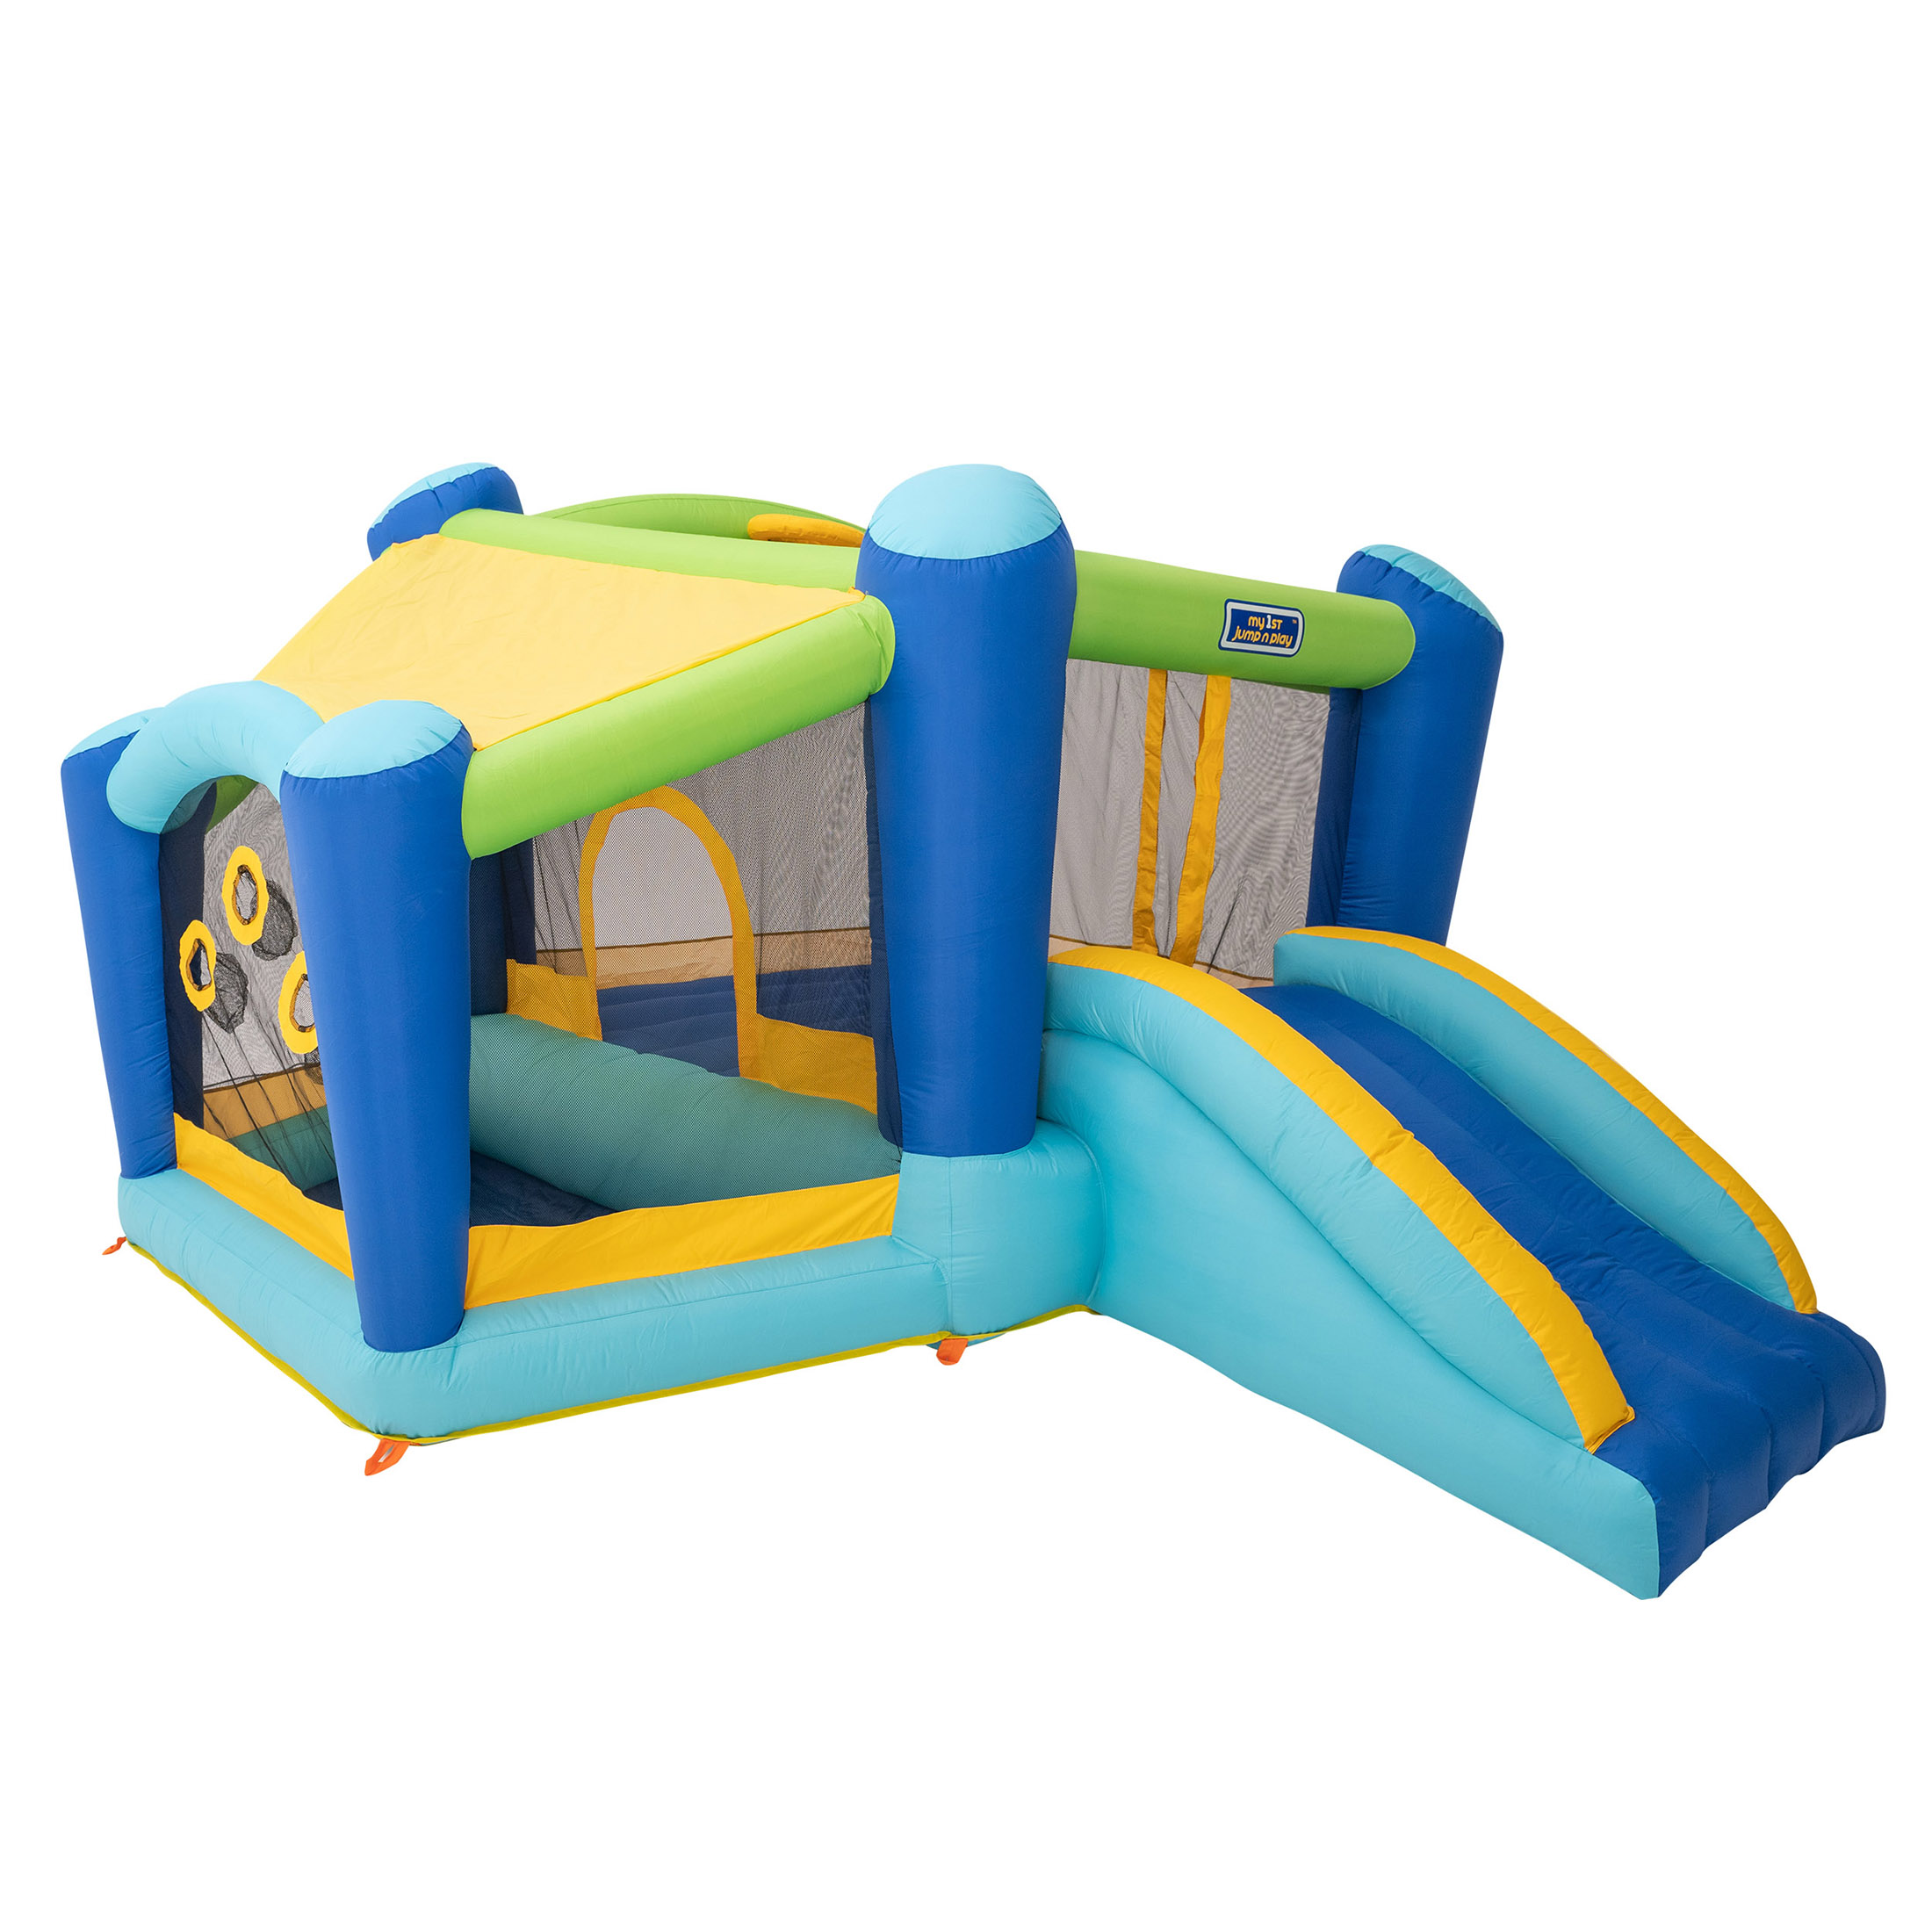 Sportspower My First Jump 'n Slide Bounce House with Ball Pit & with Lifetime Warranty on Heavy Duty Blower - image 10 of 10